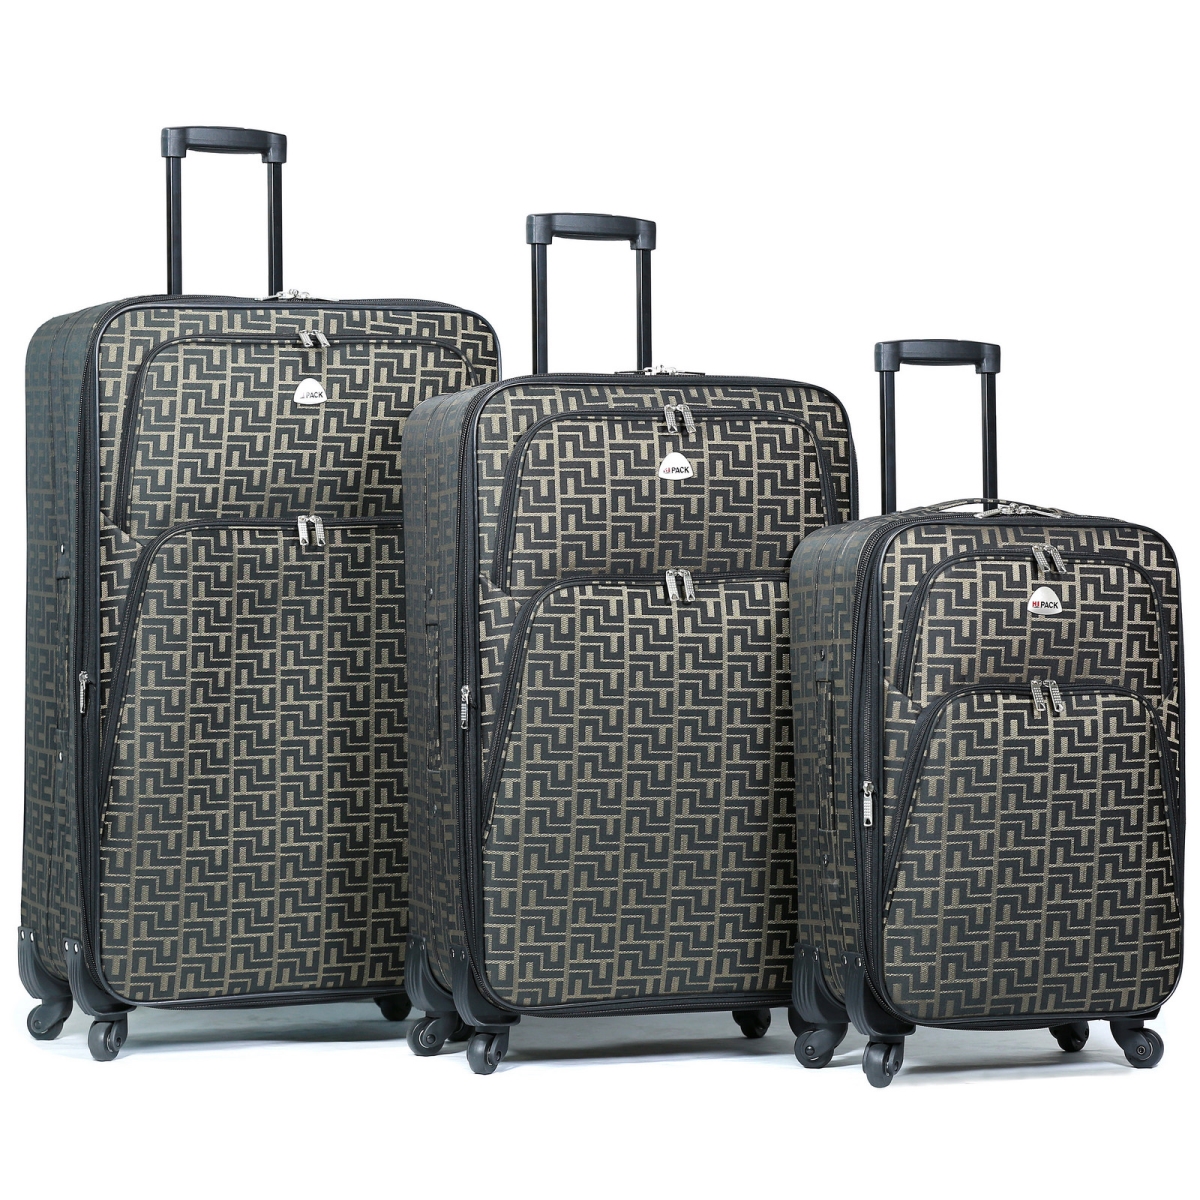 25hy-305-coffee Spinner Expandable Luggage Set - Coffee, 3 Piece